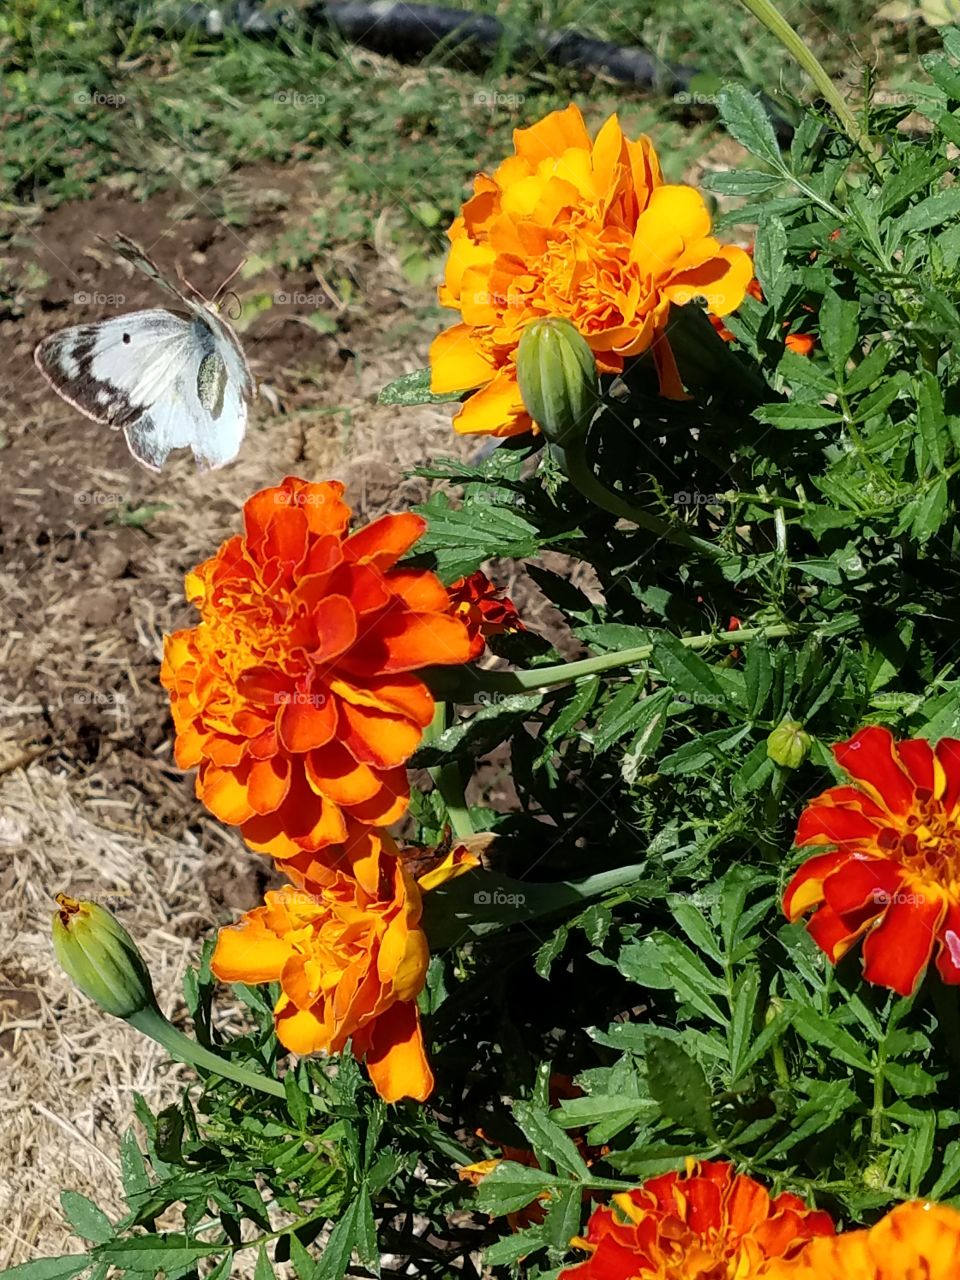 Marigolds and a butterfly